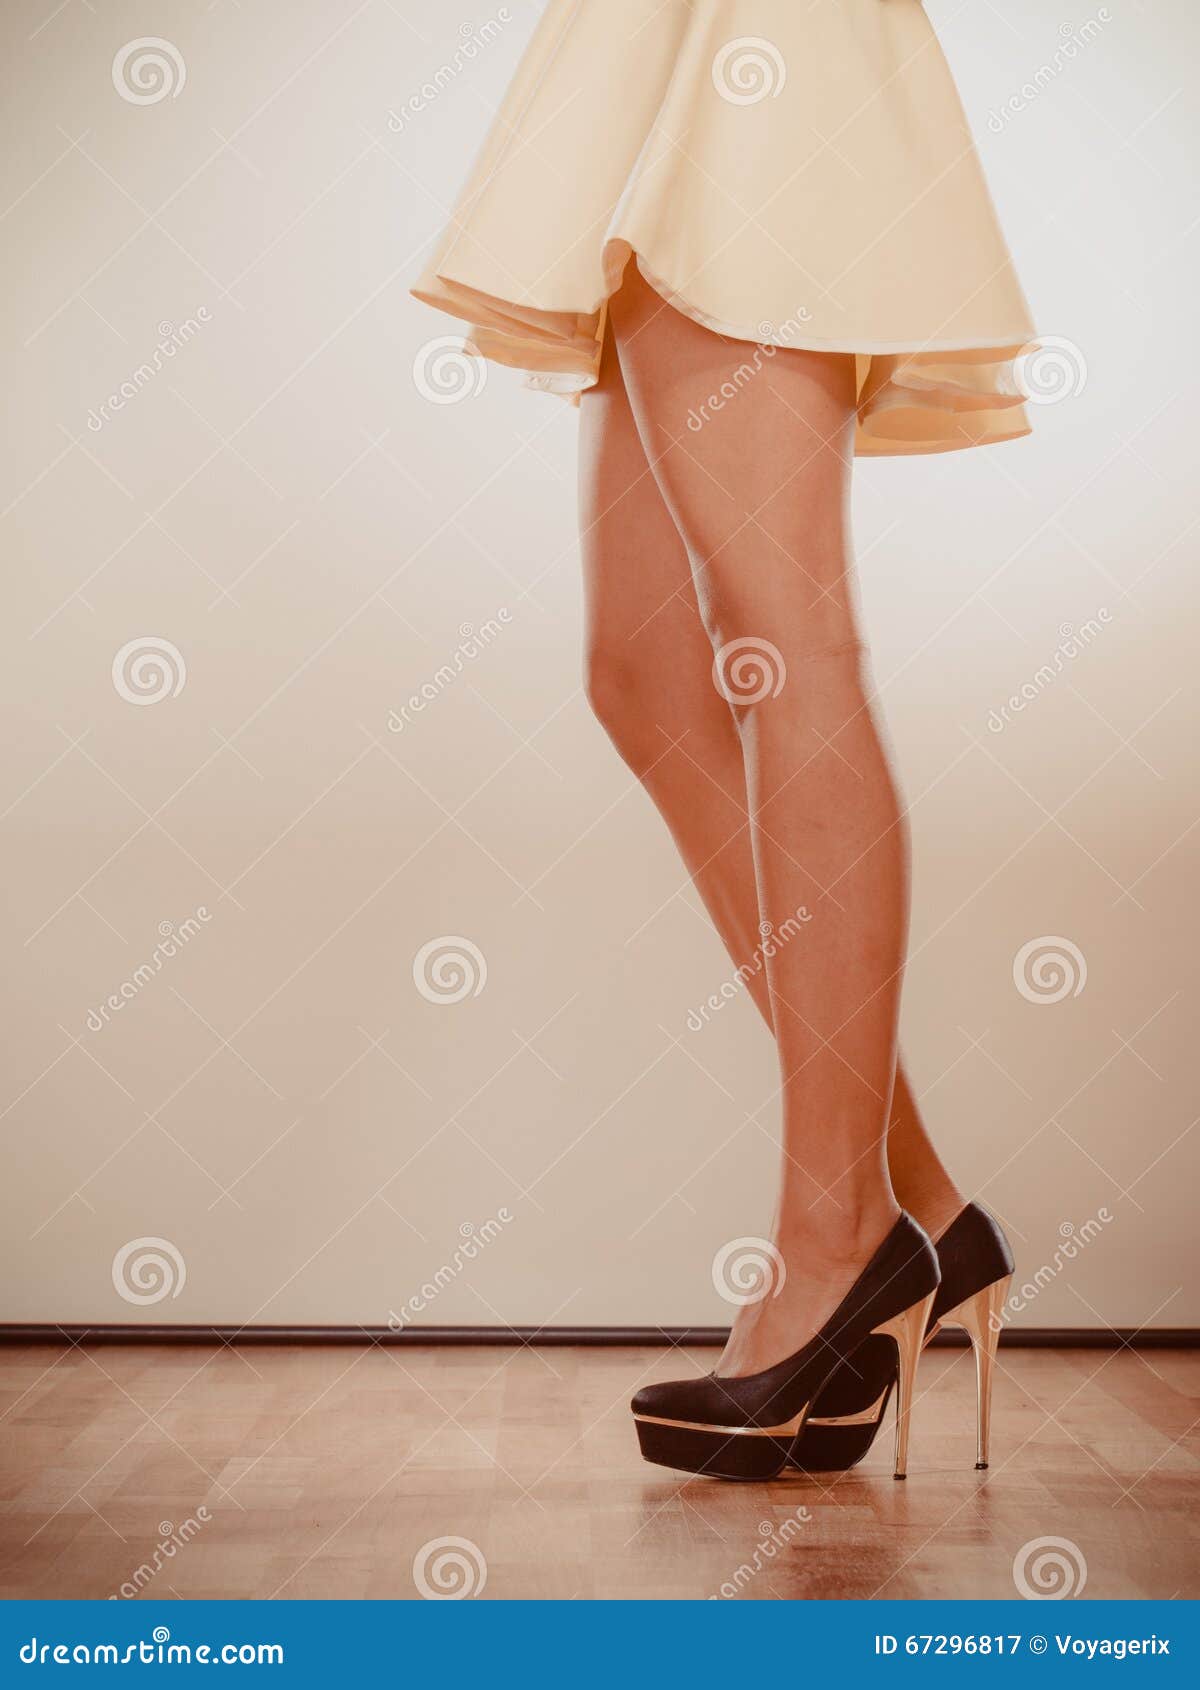 High Heels Spiked Shoes on Female Legs Stock Image - Image of girl ...